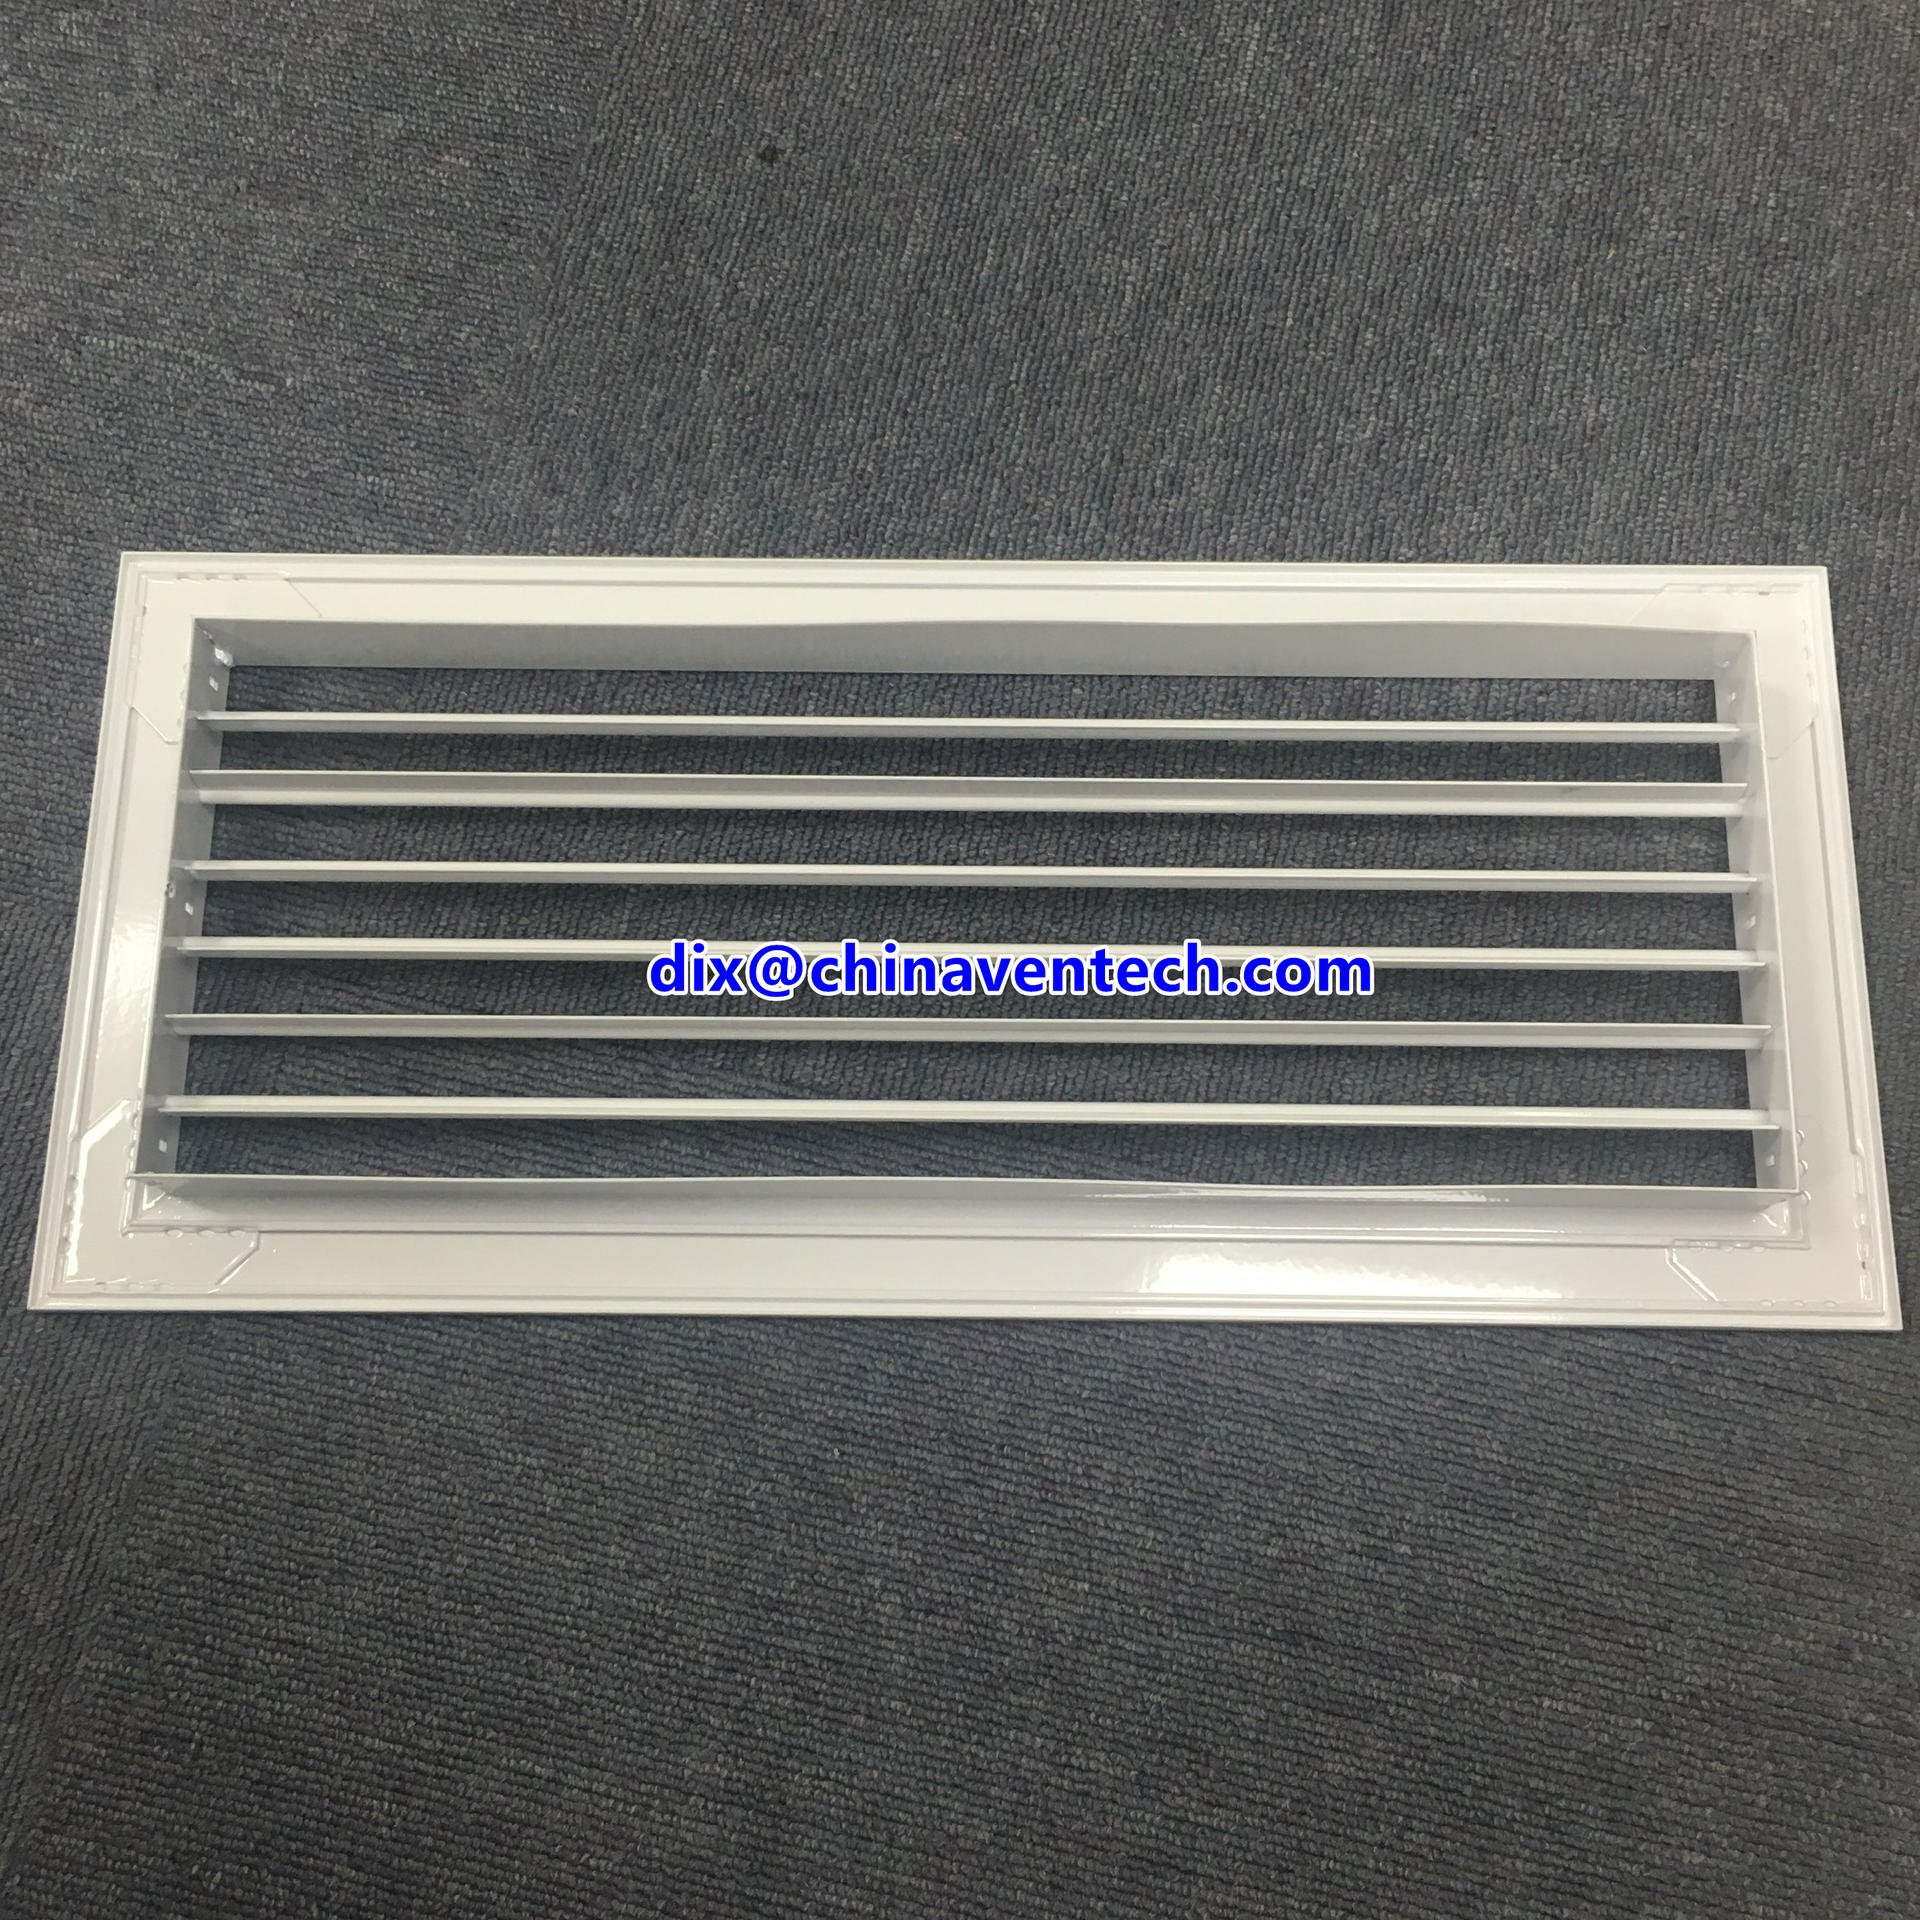 Ventech High Quality Air Conditioning Ceiling Air Register Single Deflection Grille